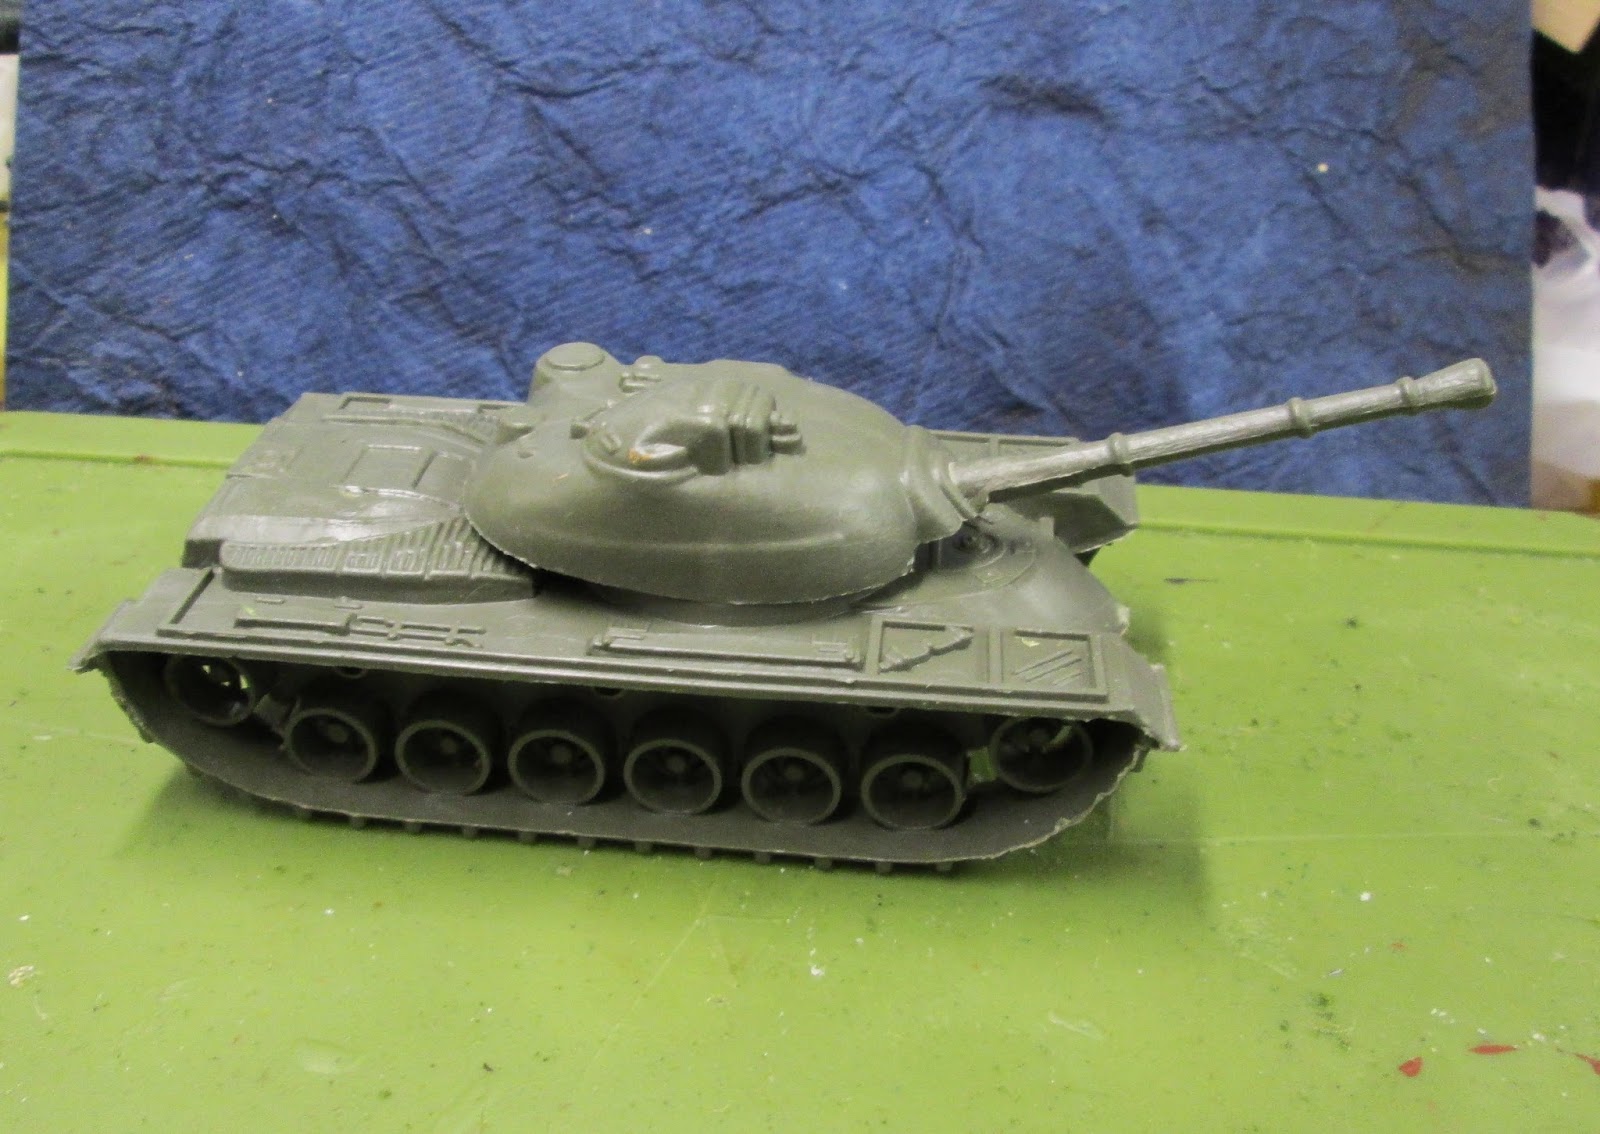 One More Gaming Project: 28mm Sci-Fi Tanks from Made-in-China Toys ...